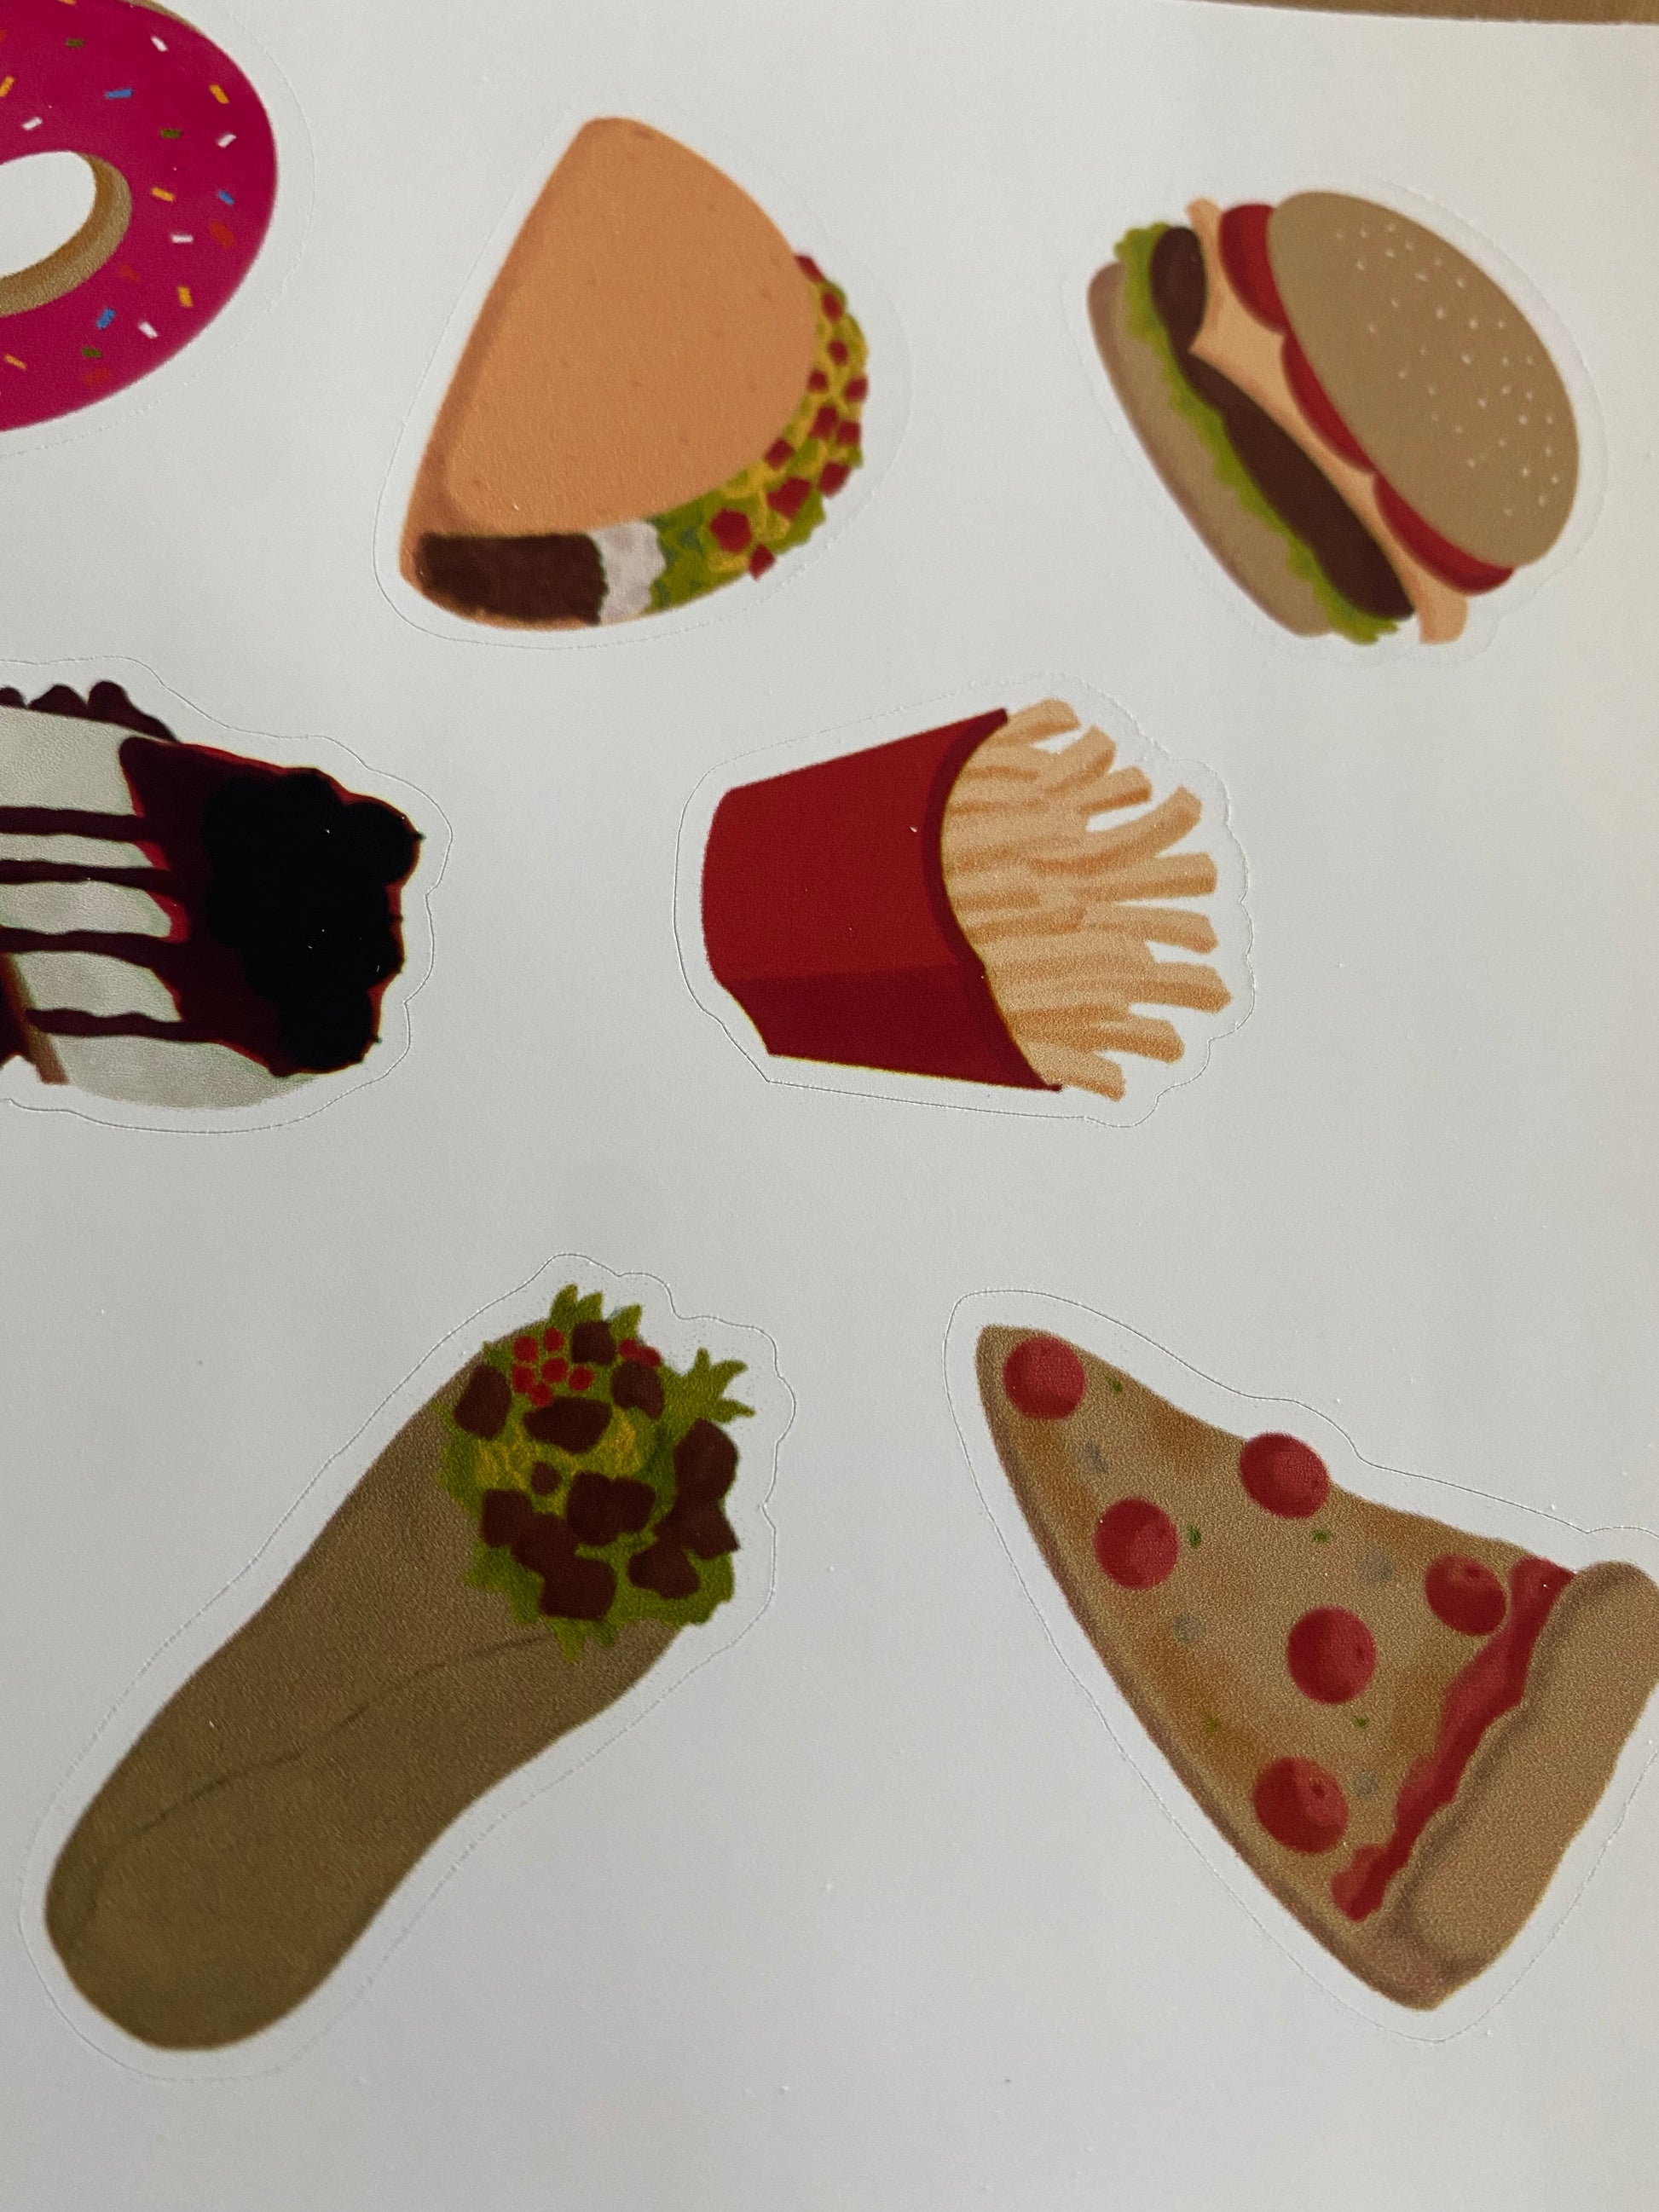 another angle of comfort food journal sticker showing burger, tacos, fries, pizza, burrito, cheesecake and donut